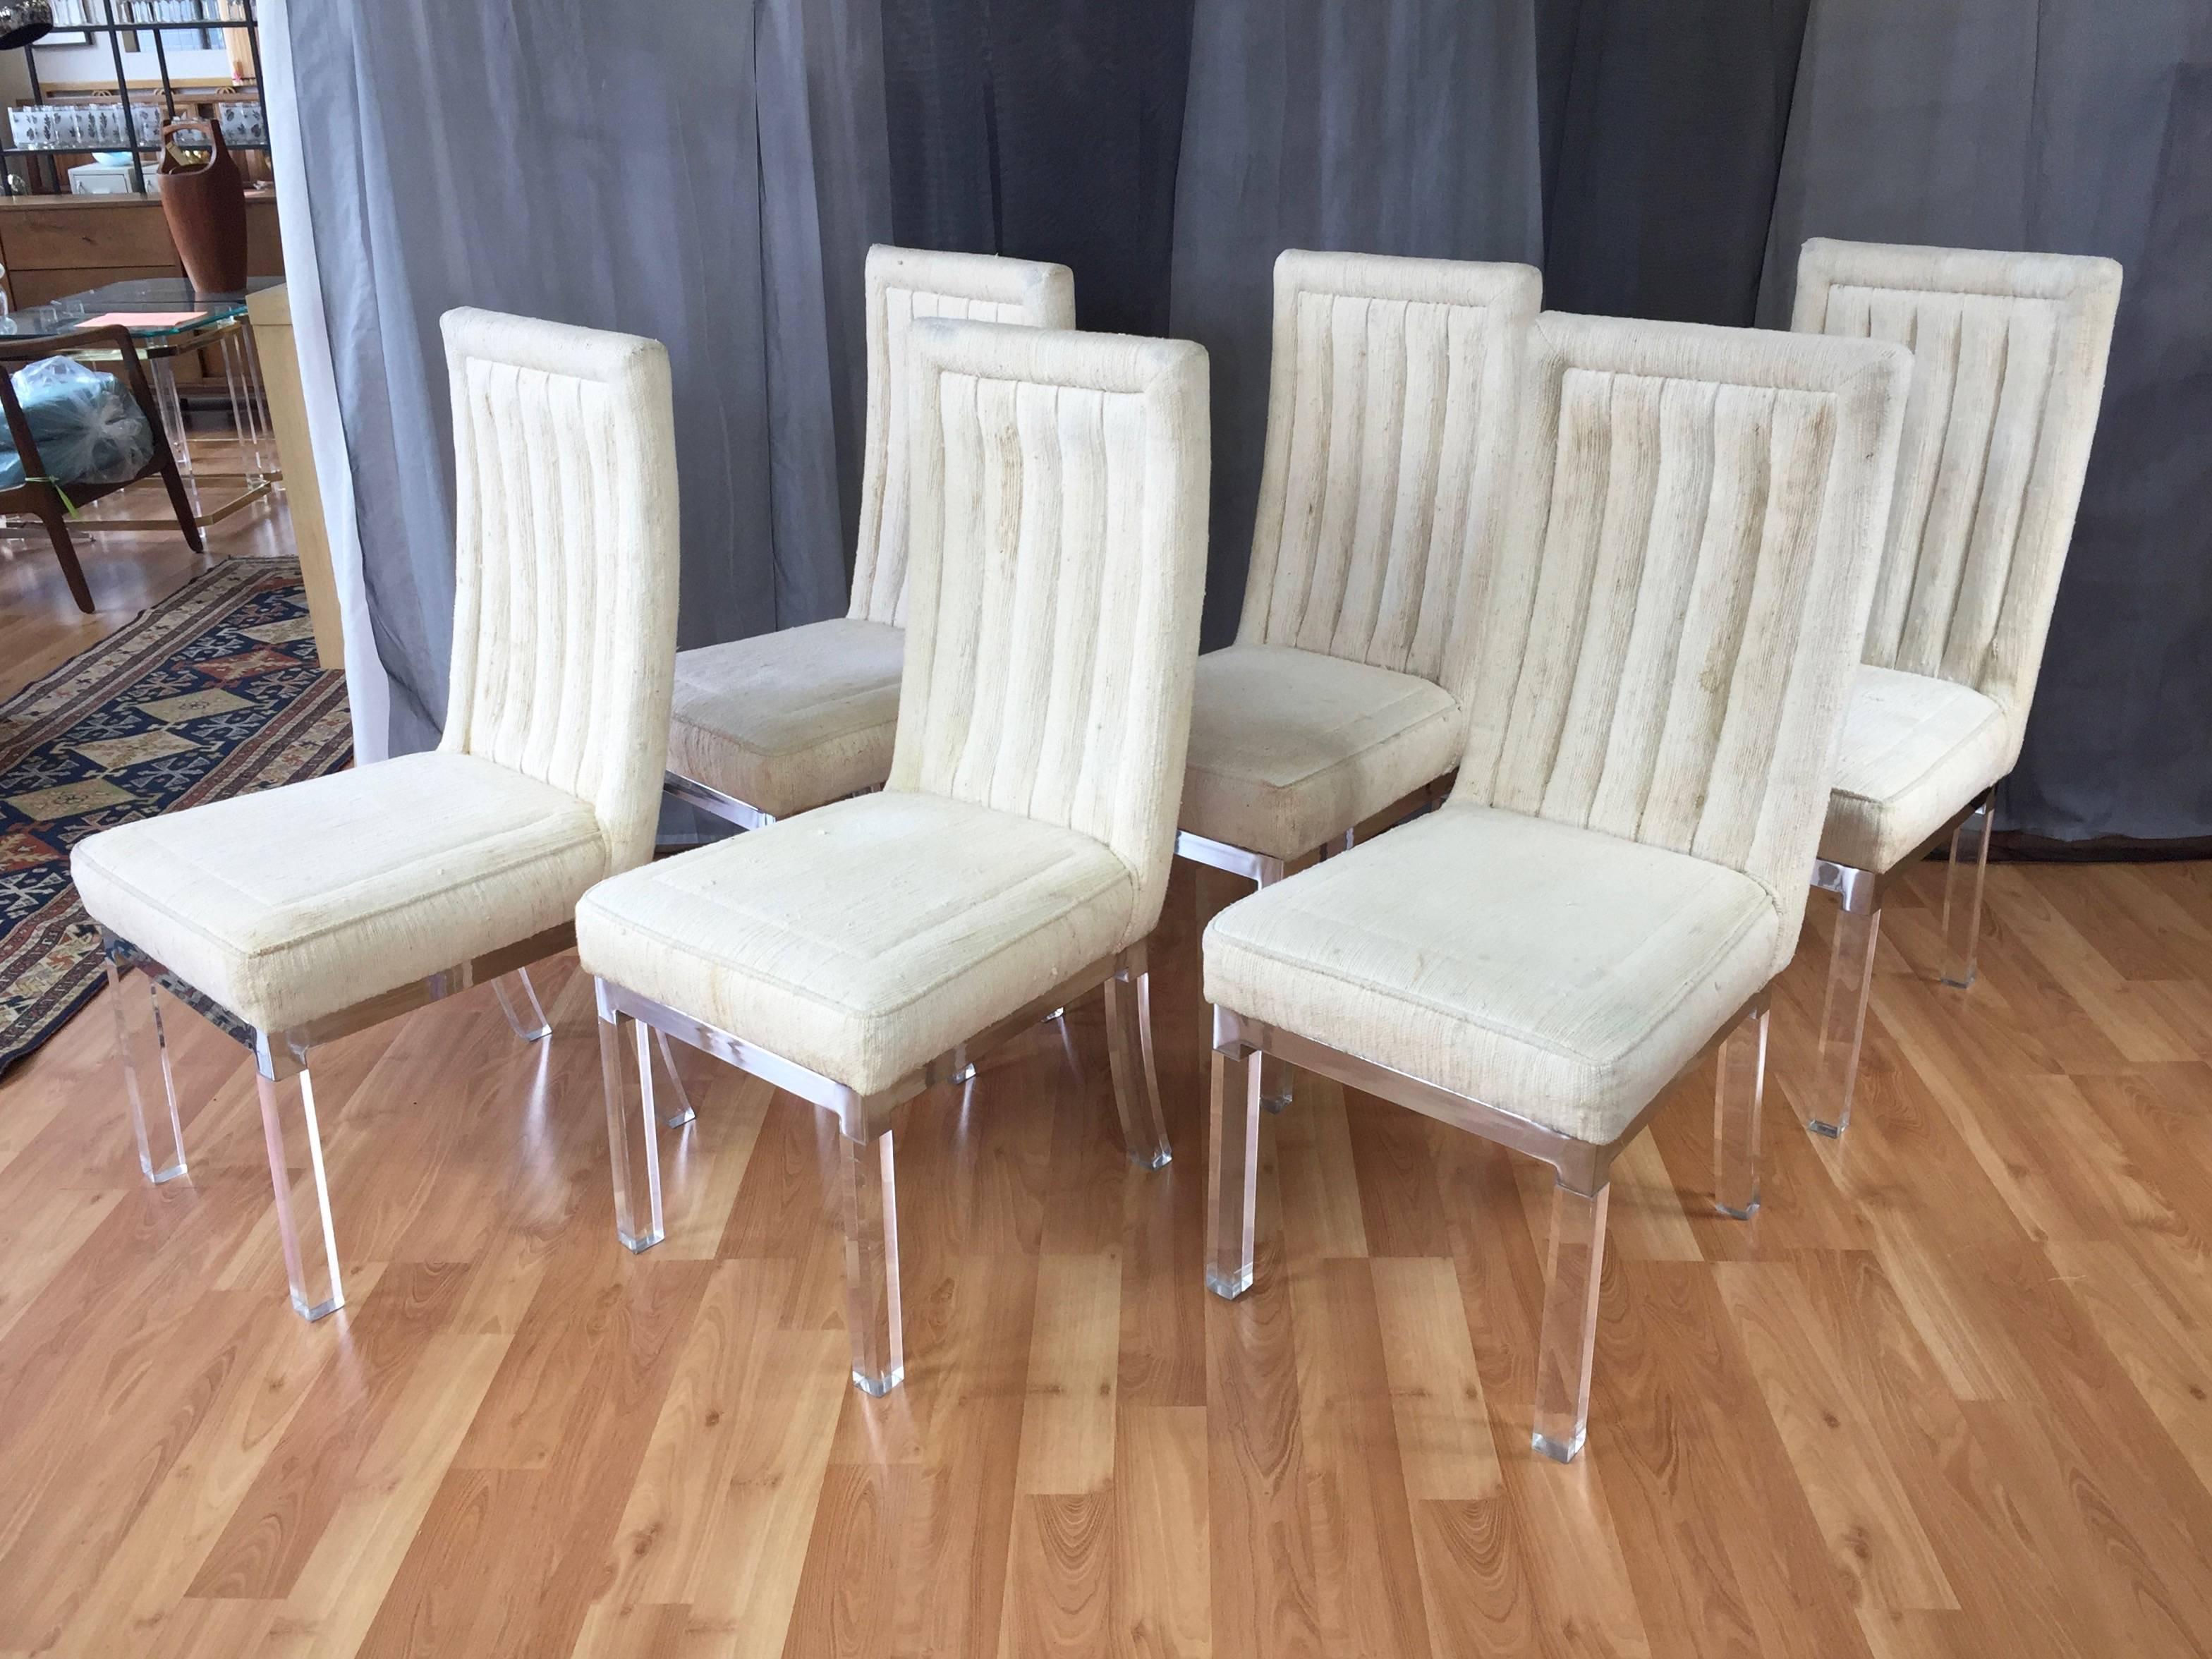 
Four Hollywood glam dining chairs with Lucite legs, polished nickel plate bases and upholstered high back seats by Charles Hollis Jones.

Crystal clear legs and mirror-finish base give each chair the enchanted appearance of floating in mid-air.